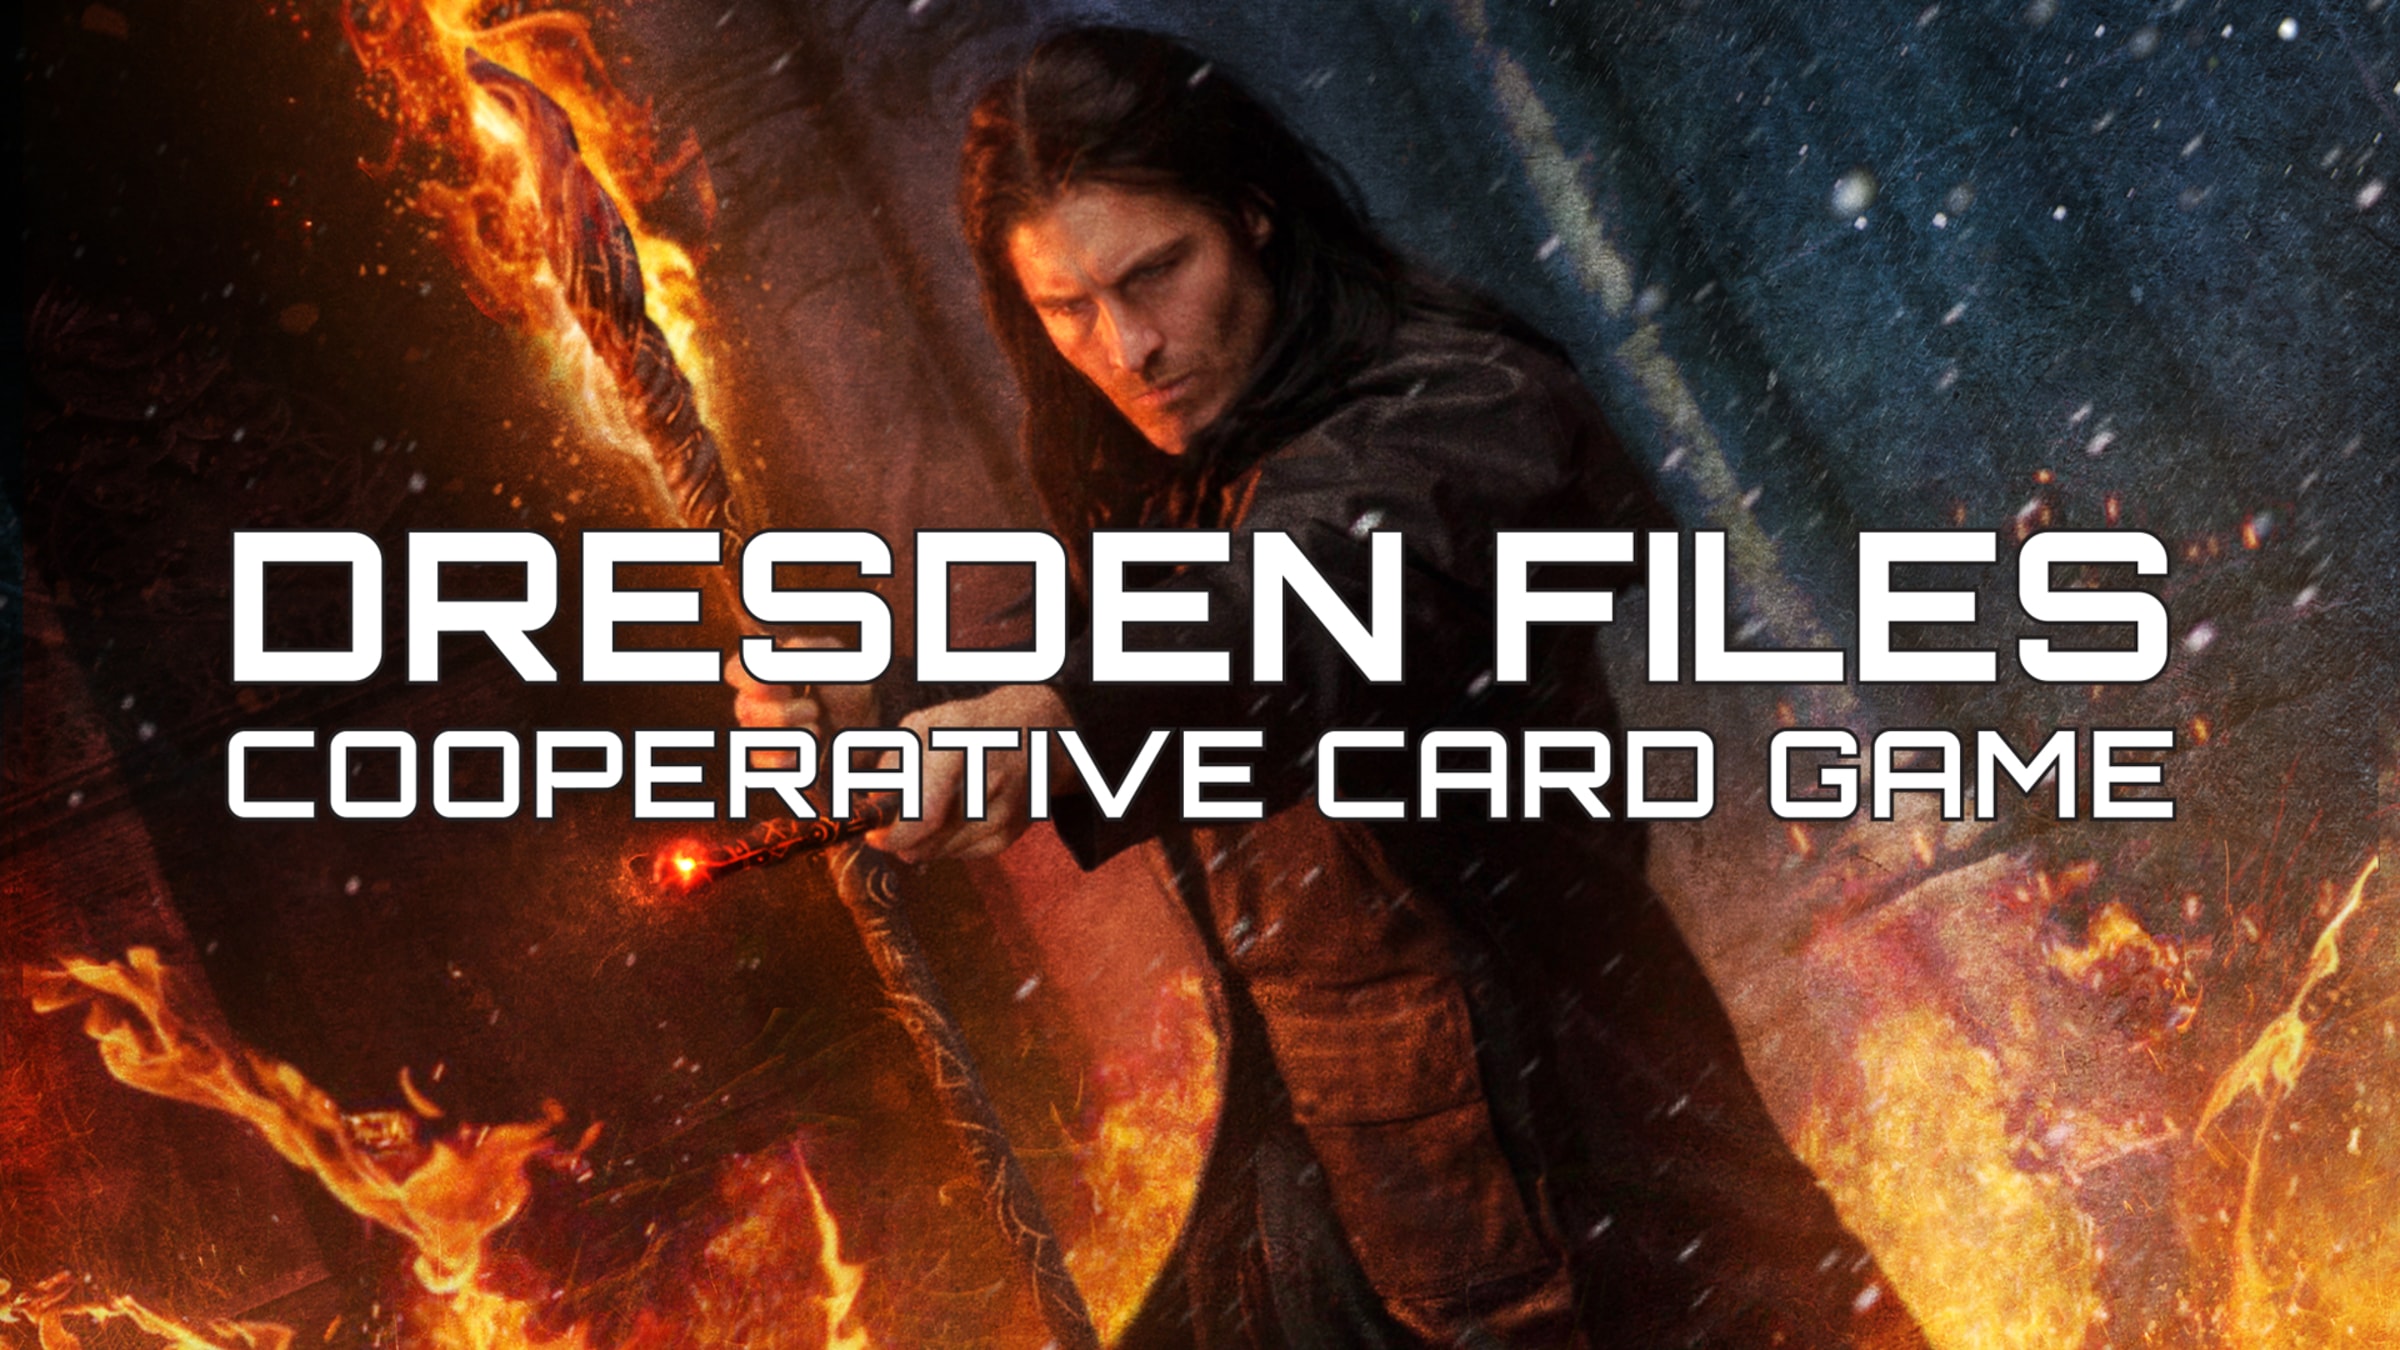 https://assets.nintendo.com/image/upload/c_fill,w_1200/q_auto:best/f_auto/dpr_2.0/ncom/en_US/games/switch/t/the-dresden-files-cooperative-card-game-switch/hero